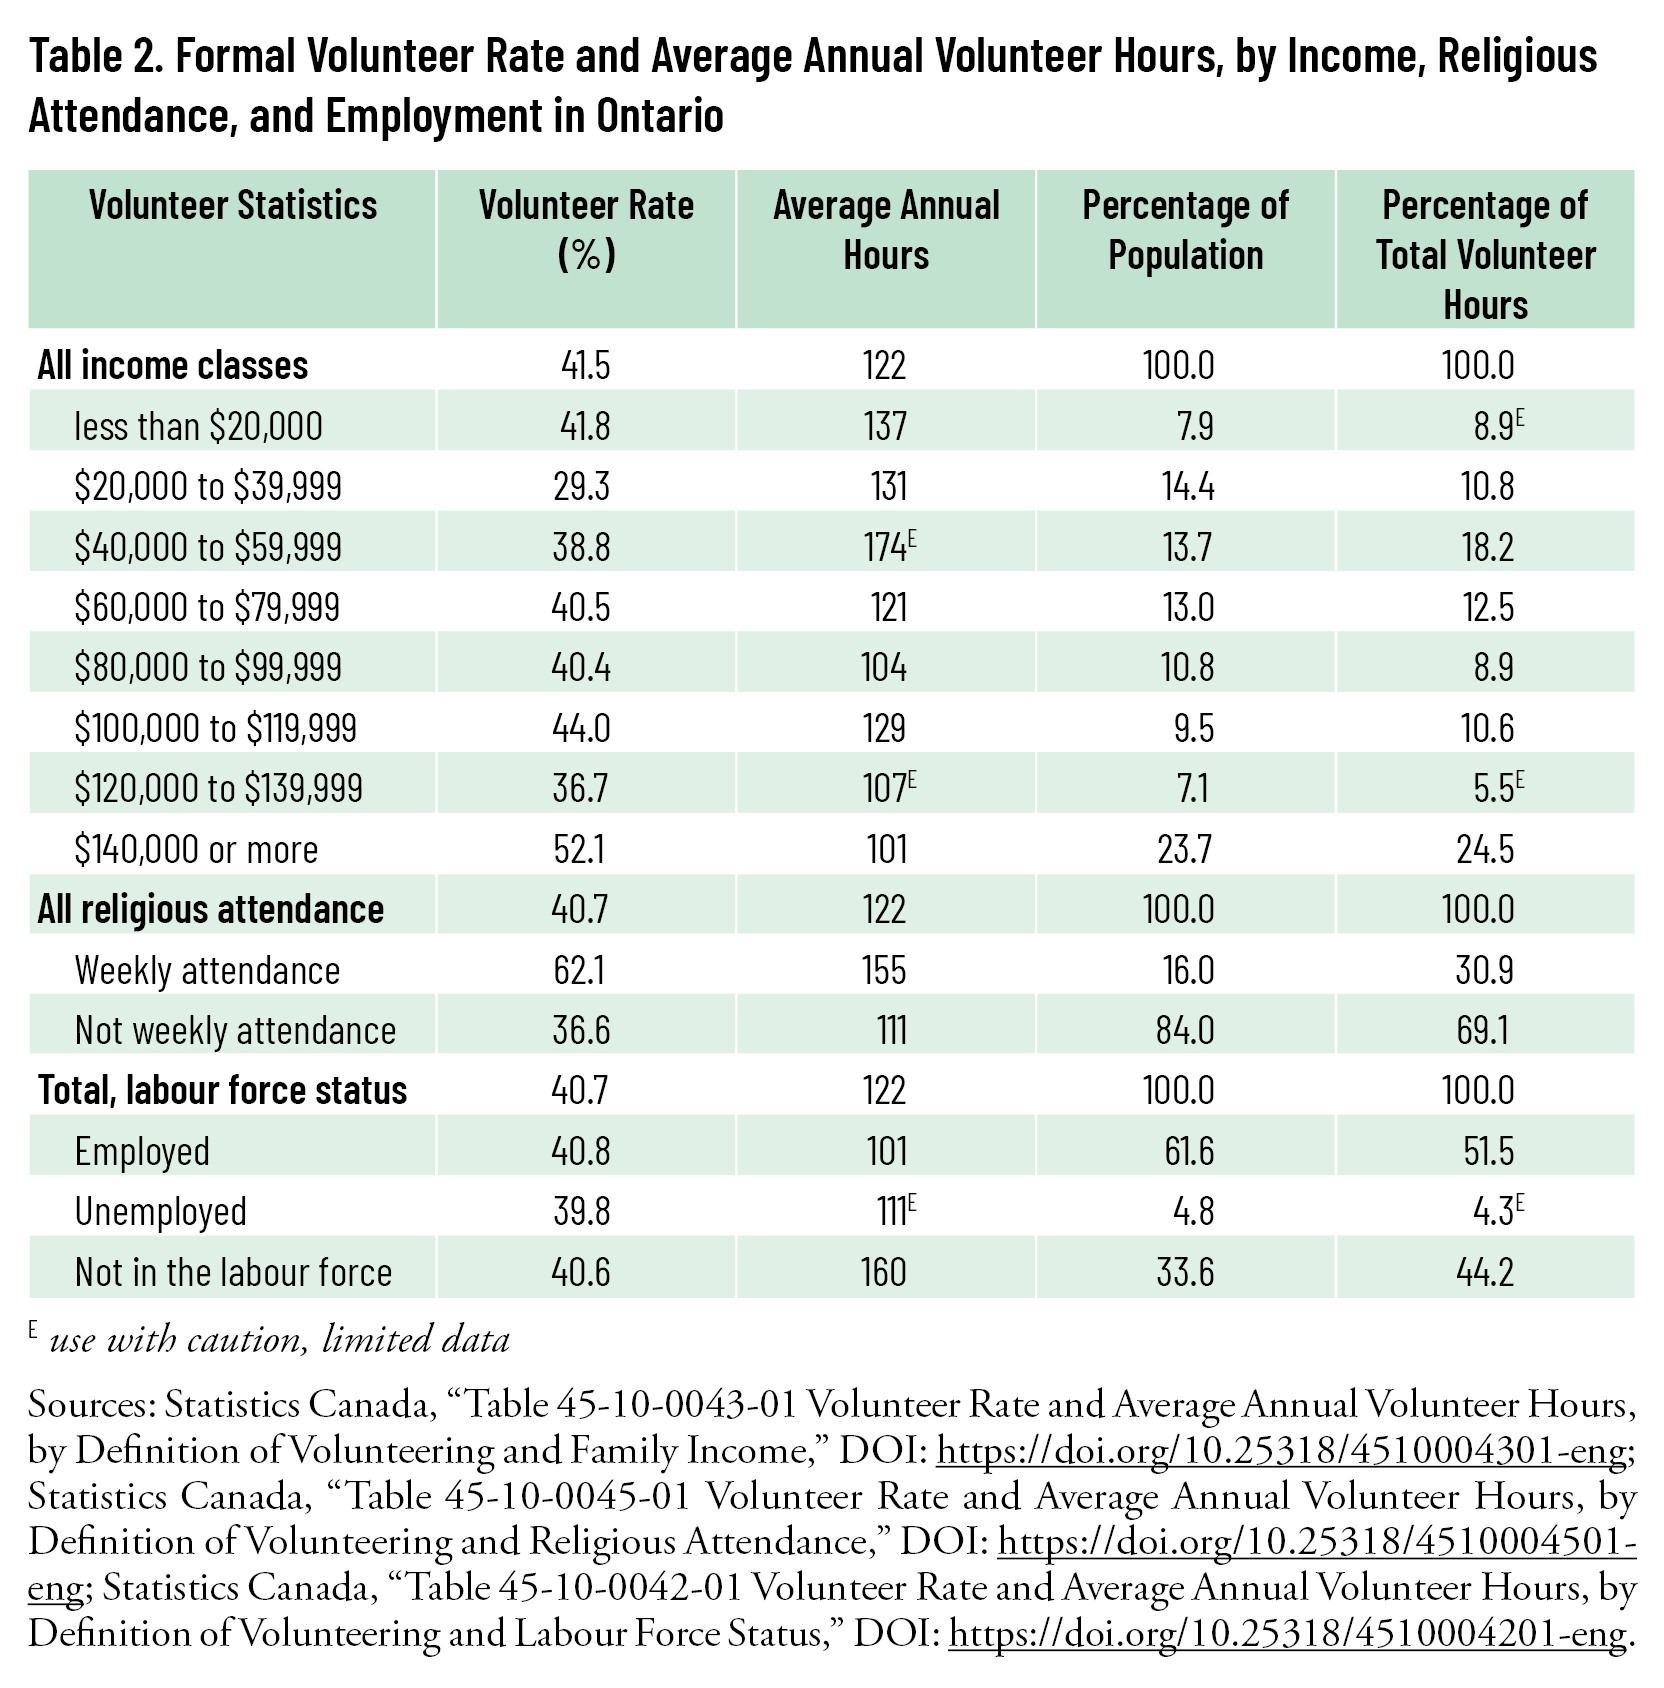 Table 2: Formal Volunteer Rate and Average Annual Volunteer Hours, by Income, Religious Attendance, and Employment in Ontario